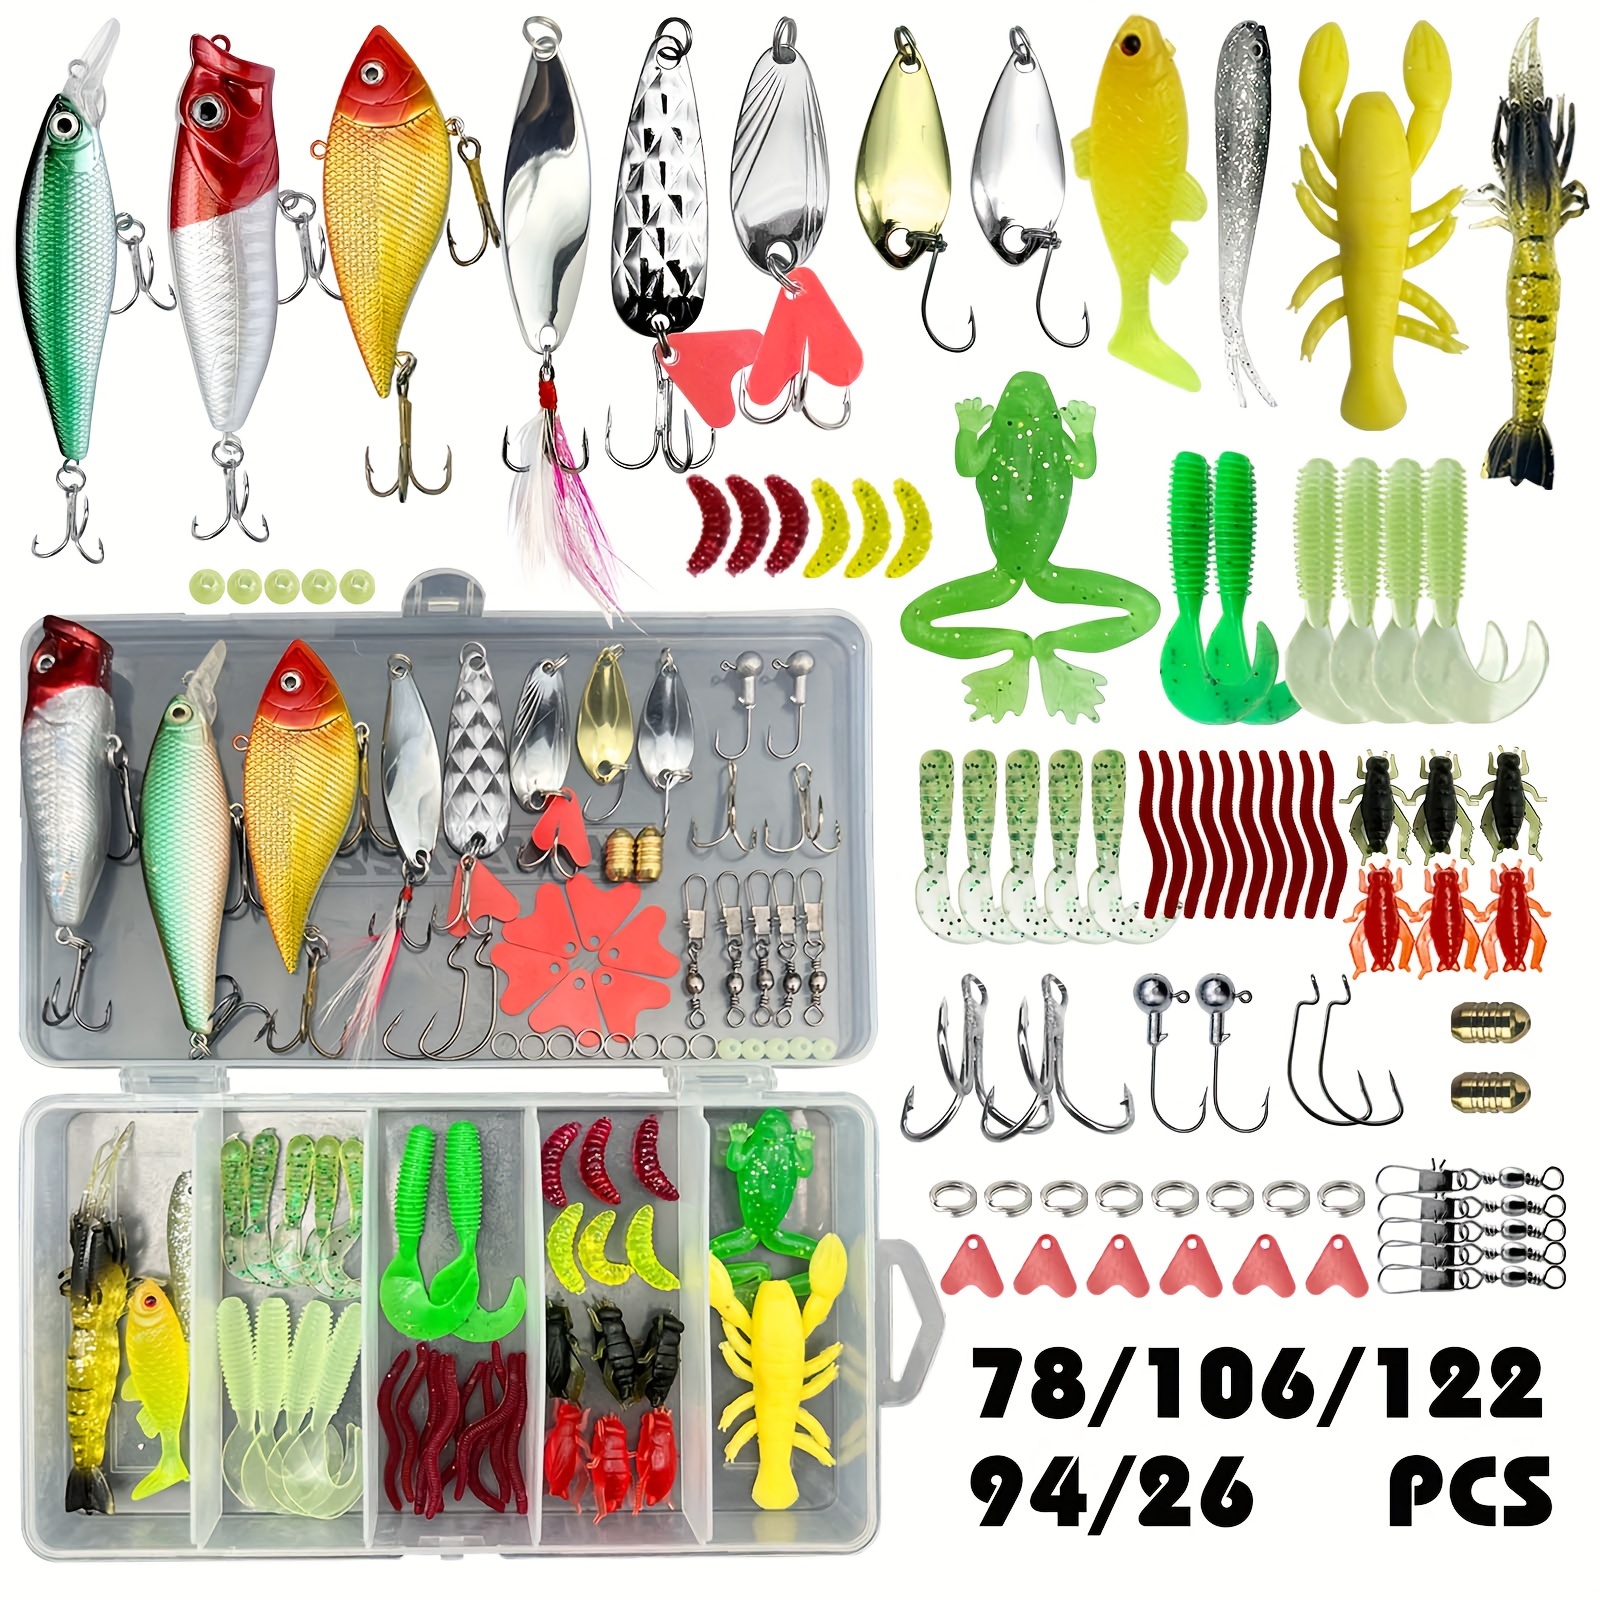 Shop Online for Fly Fishing & Fishing Tackle